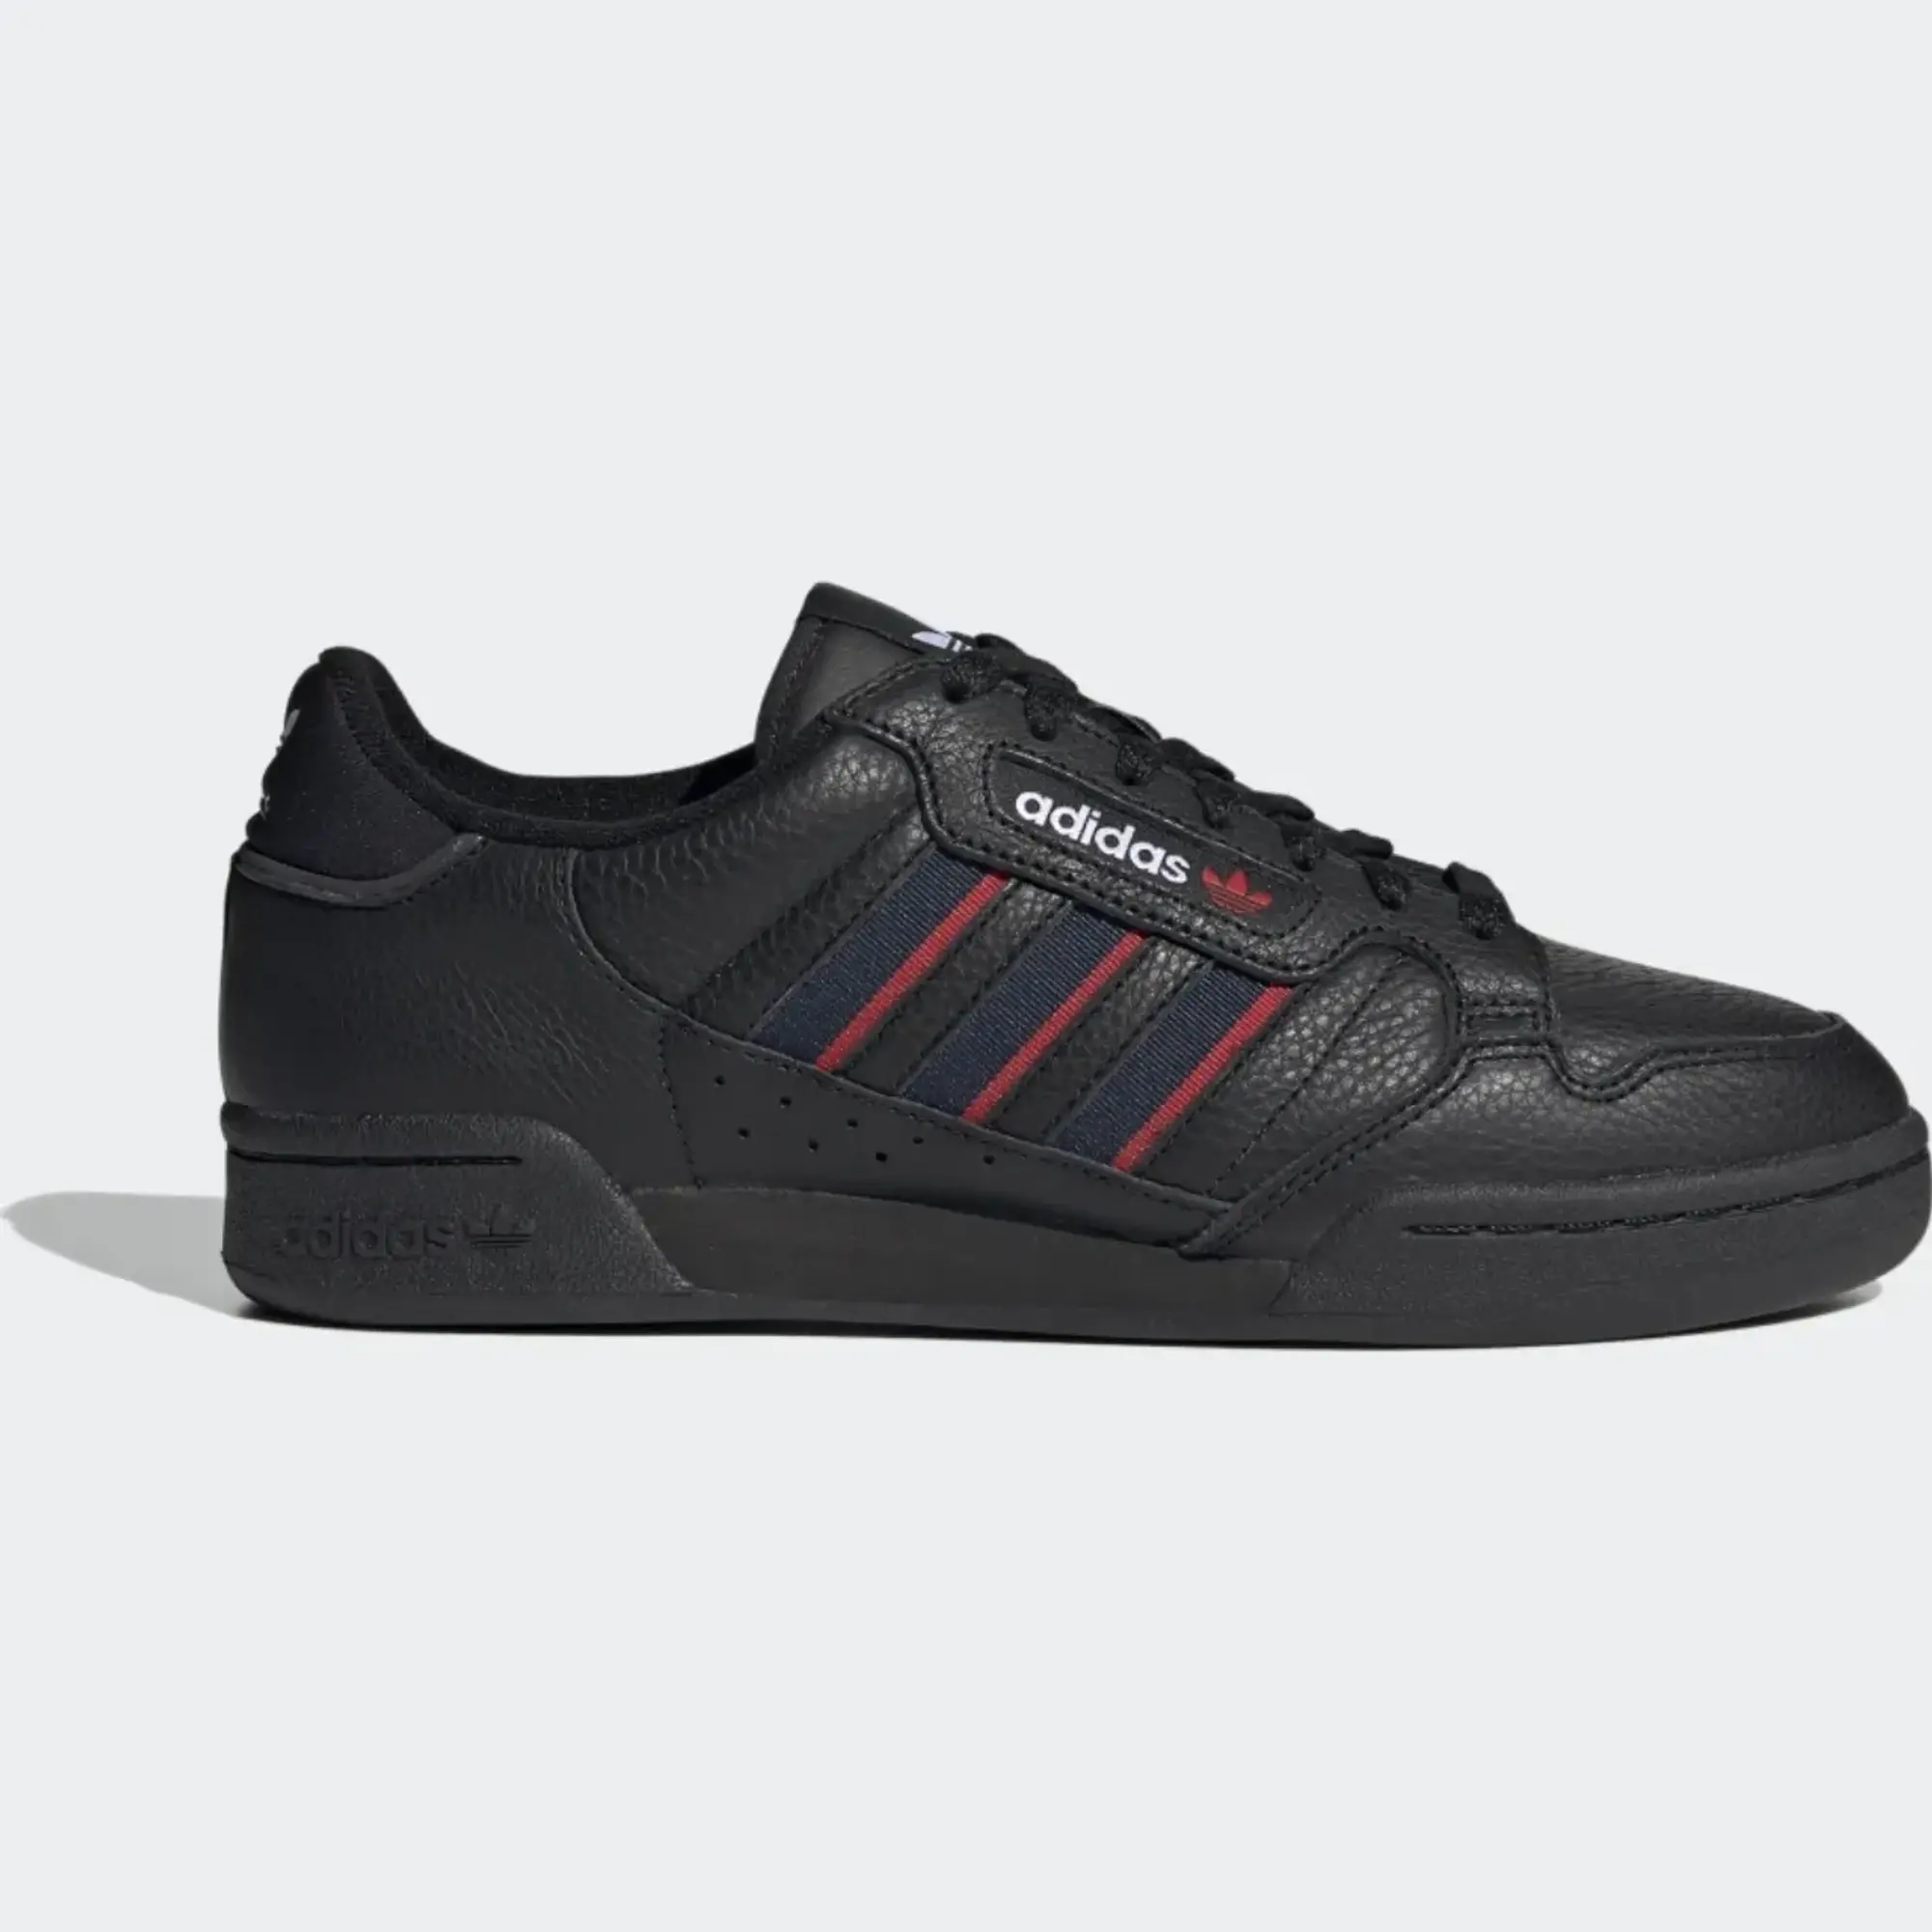 adidas continental 80 stripe trainers in black & red